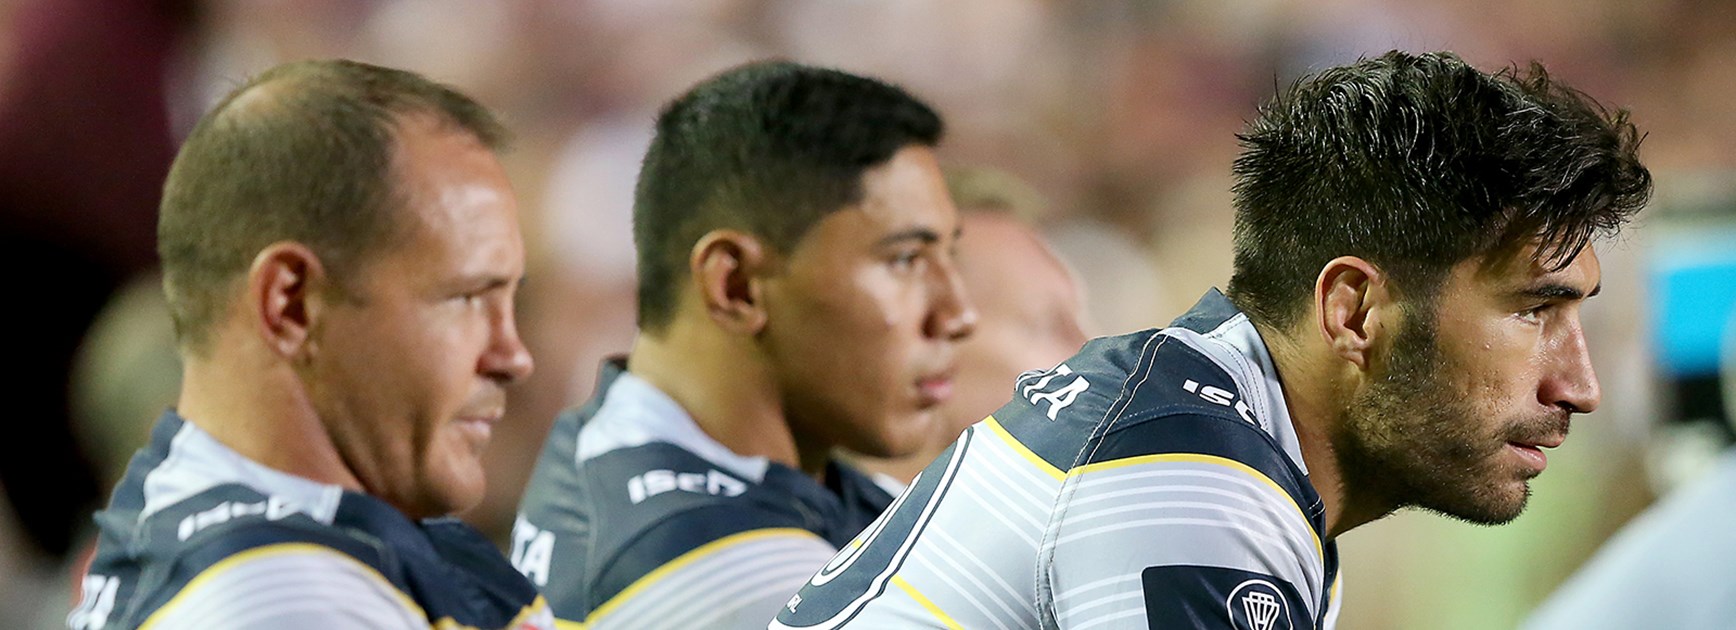 North Queensland Cowboys' minds are focused on beating the Broncos in an NRL semi-final.